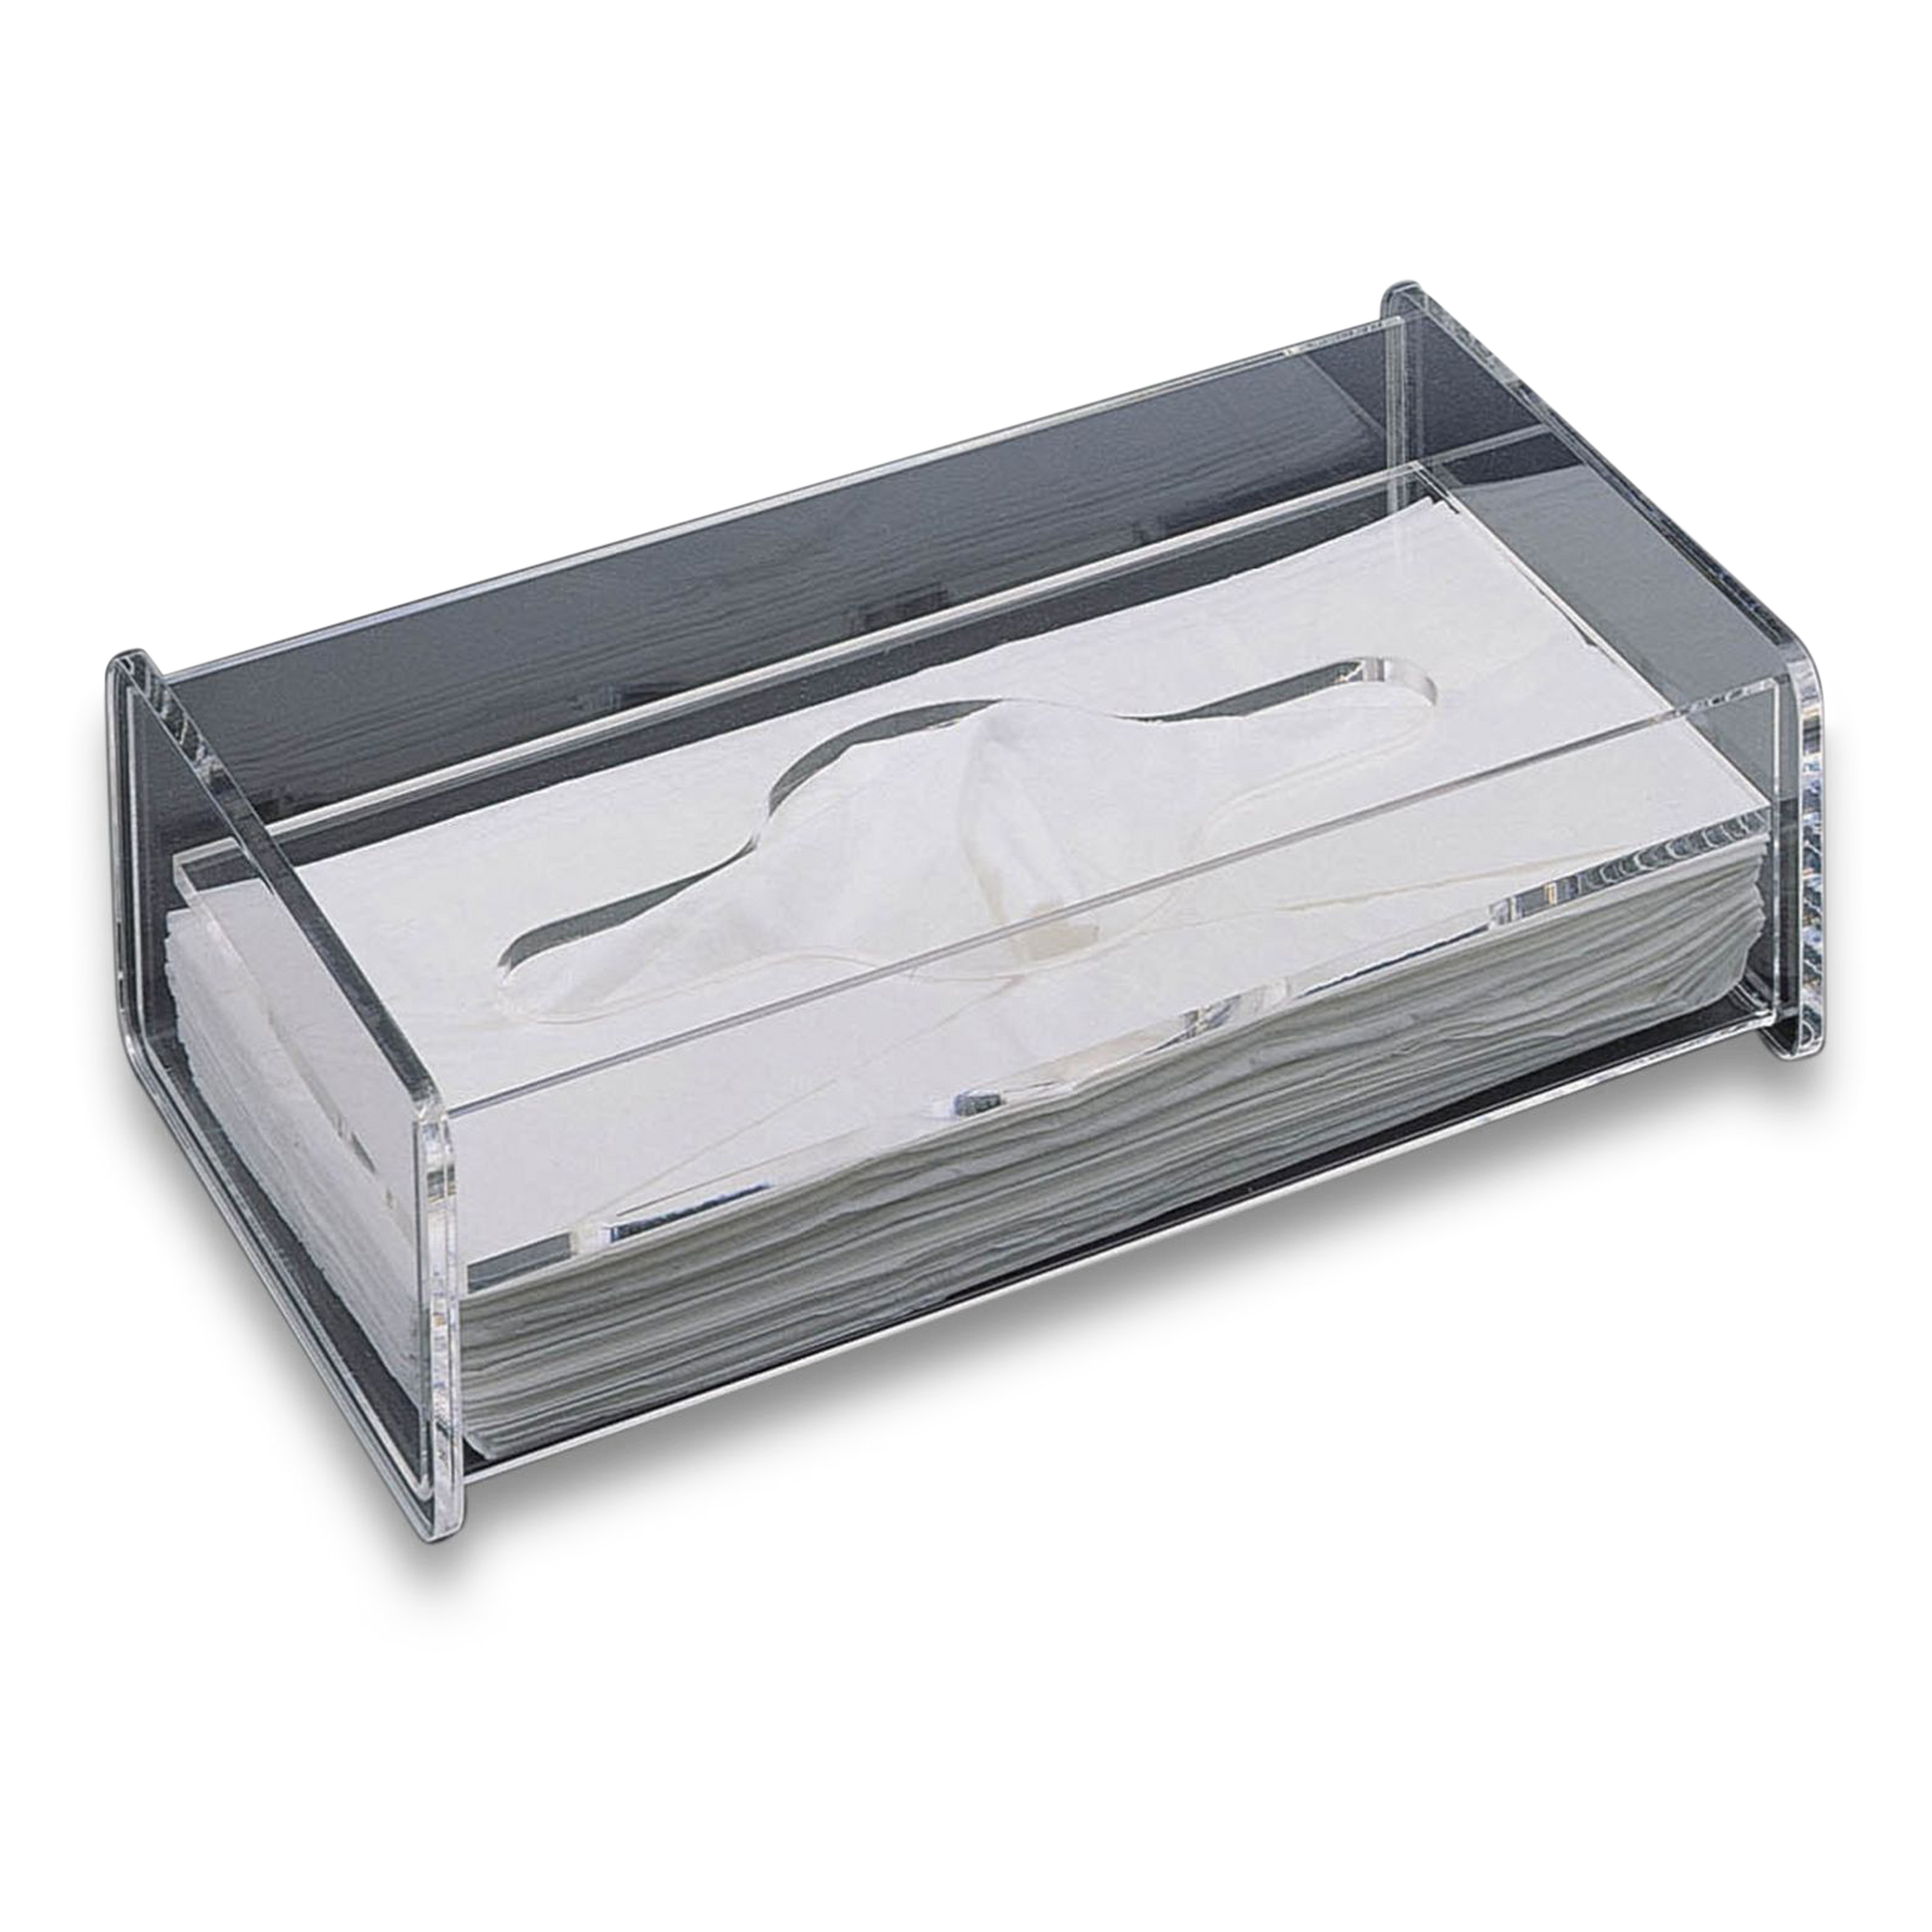 A clear acrylic tissue box that will add a modern touch to any bathroom.